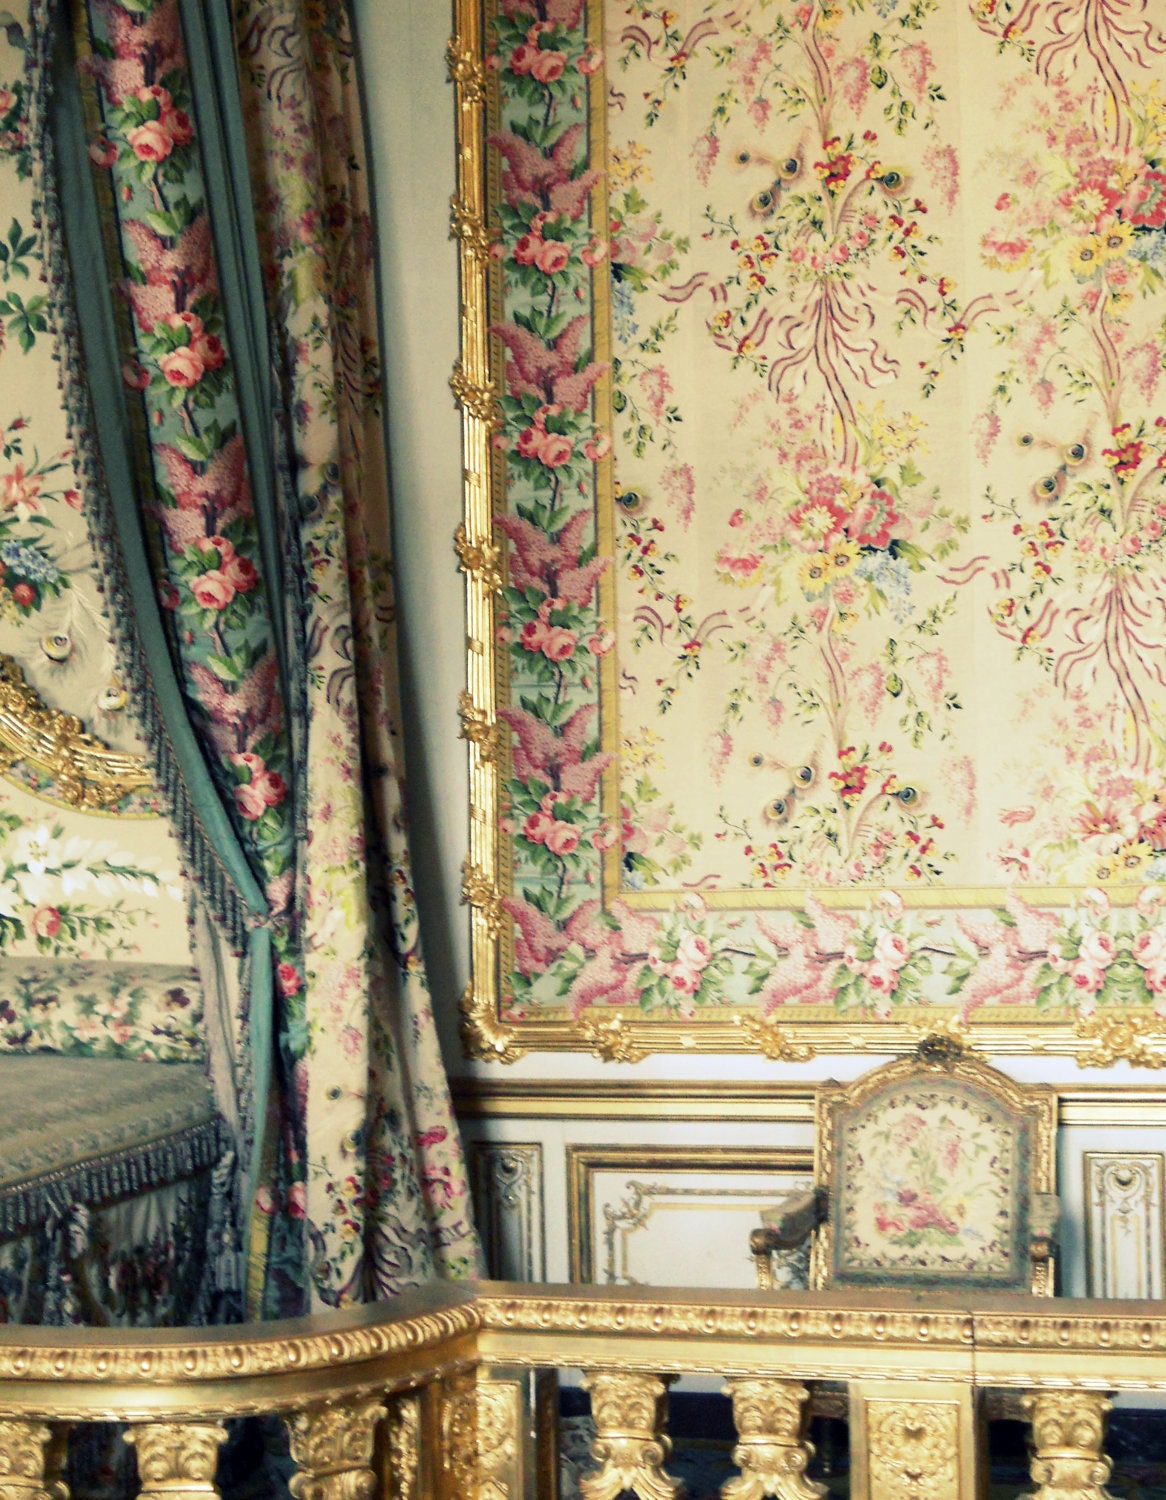 Marie Antoinette - 8x10 Paris Photo - Versailles, Rich Gold, Curtains, Chair- Luxury, Bed - King, Queen - Ornate, Baroque, Rococo - Vintage